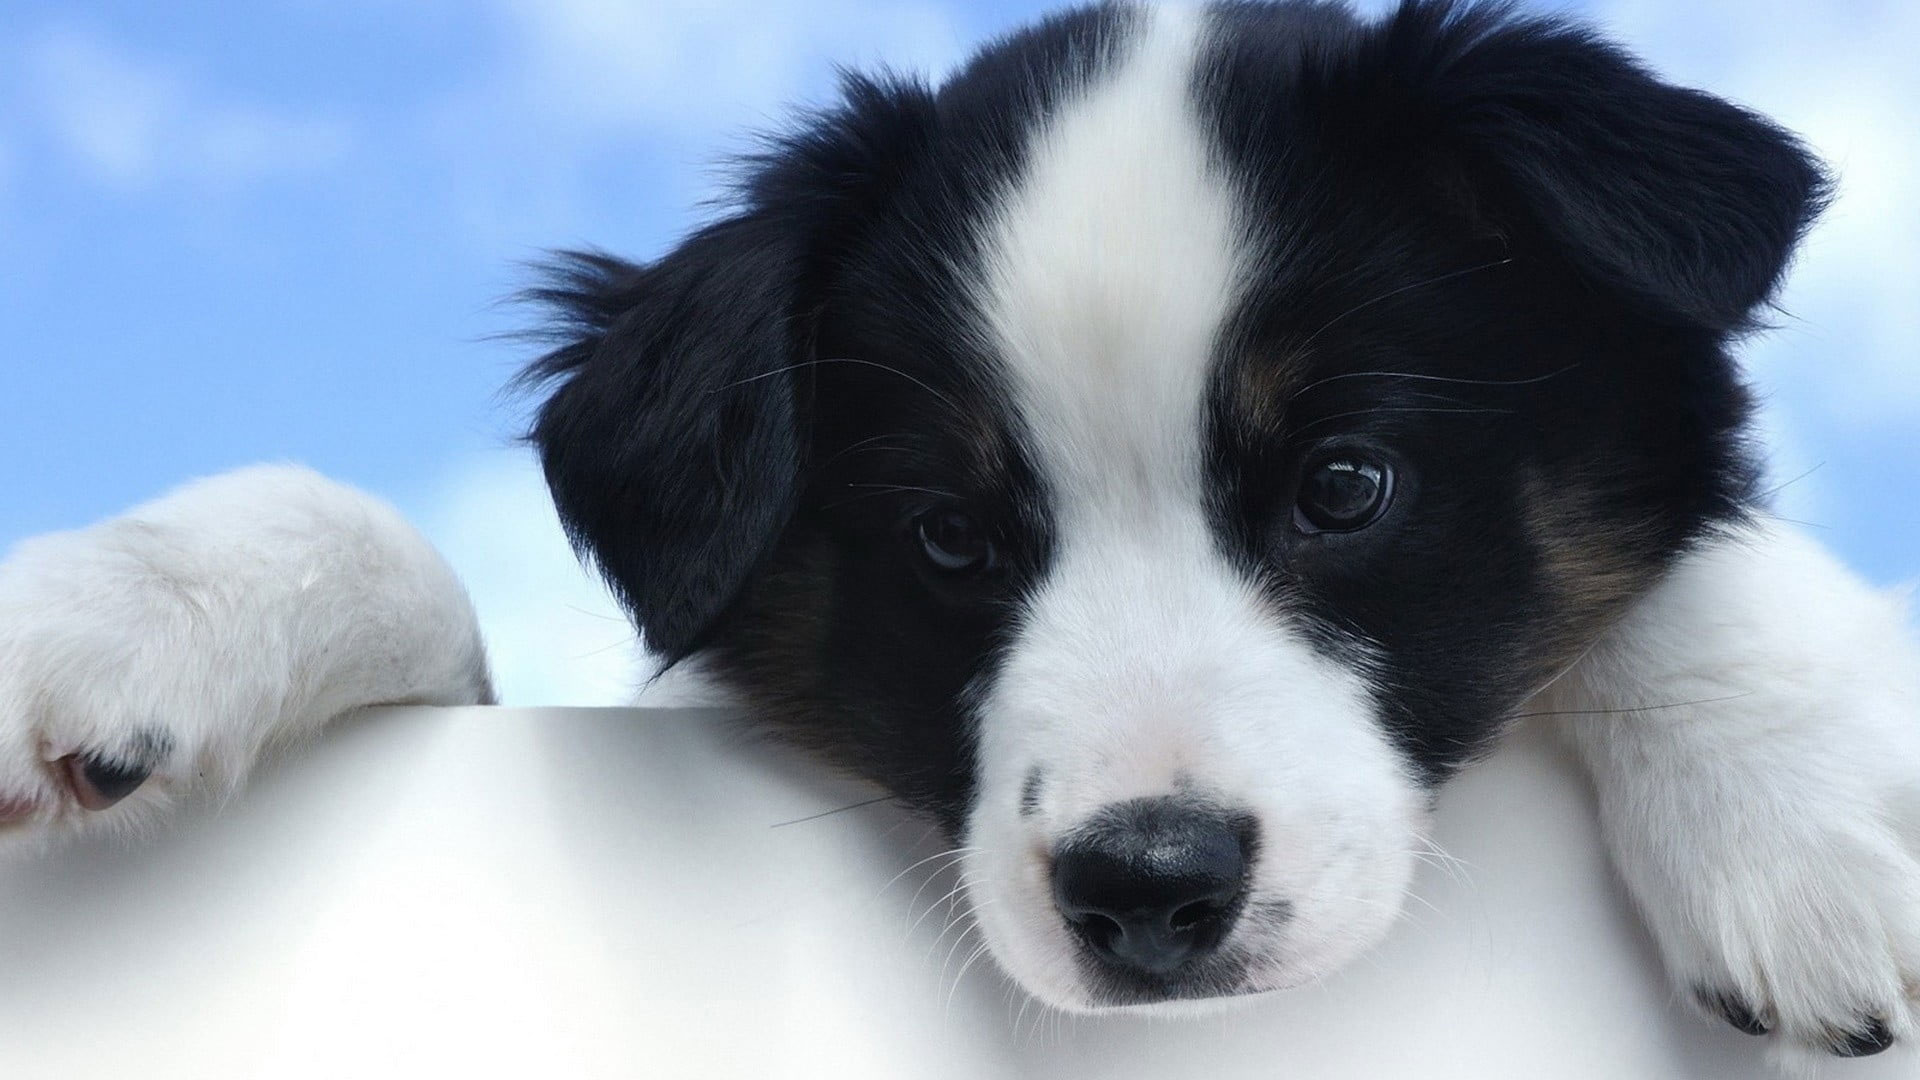 Wallpaper Black And White Puppy, Dog, Puppies, Border